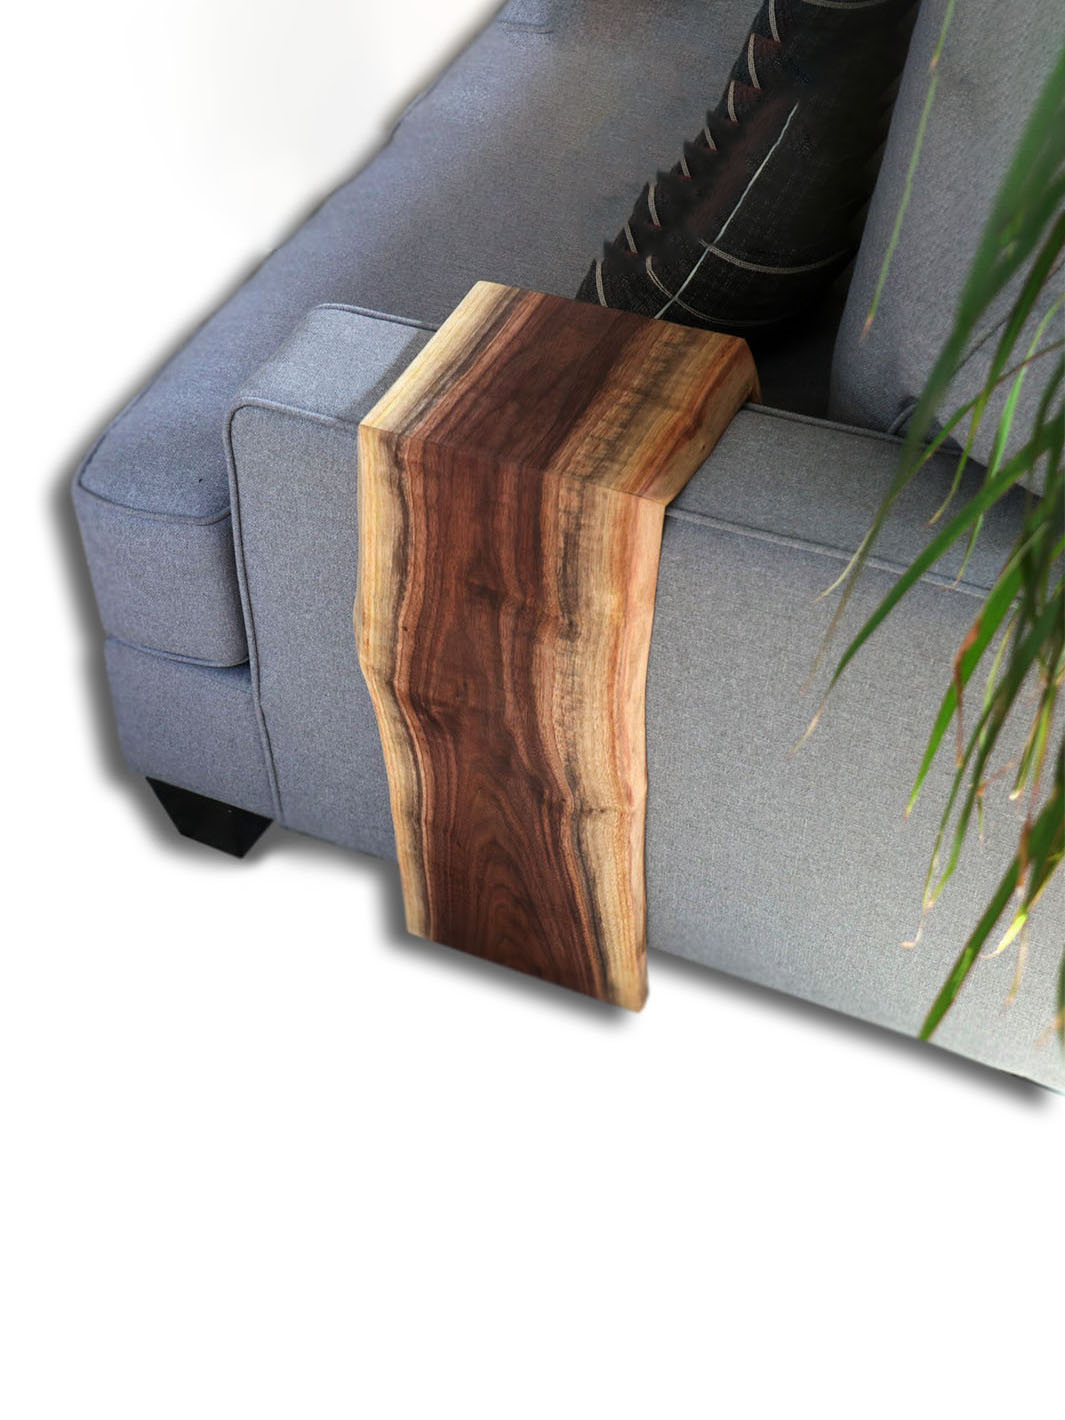 Earthly Comfort Live Edge Walnut Waterfall Armrest Sofa Table - Extra Long Square To the Floor Earthly Comfort Side Tables 